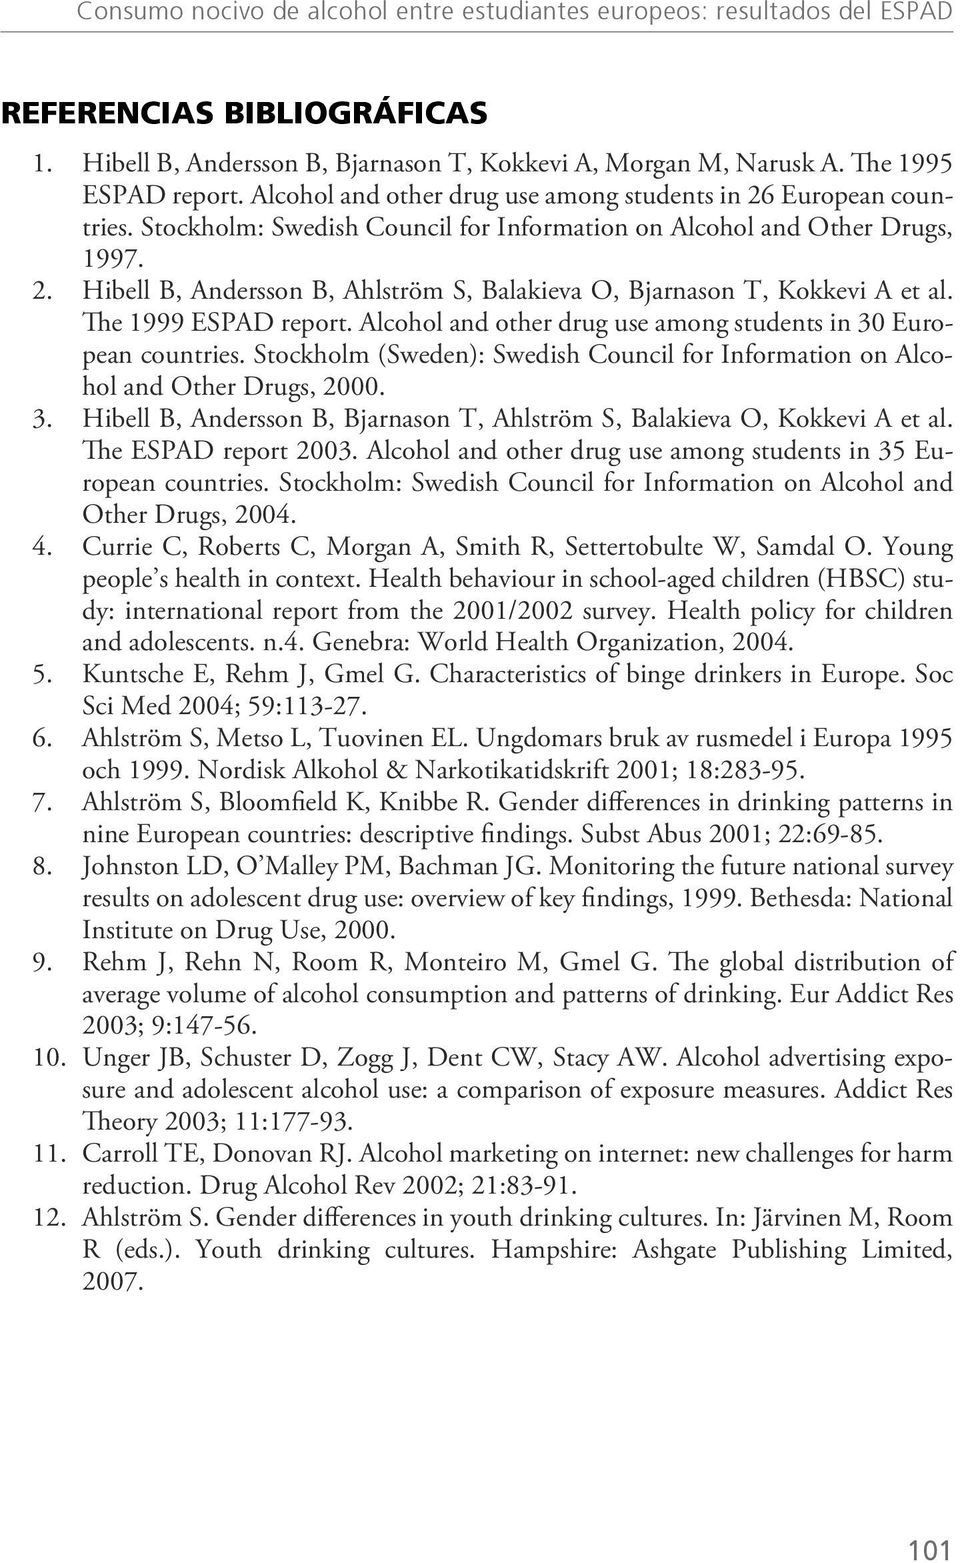 The 1999 ESPAD report. Alcohol and other drug use among students in 30 European countries. Stockholm (Sweden): Swedish Council for Information on Alcohol and Other Drugs, 2000. 3. Hibell B, Andersson B, Bjarnason T, Ahlström S, Balakieva O, Kokkevi A et al.